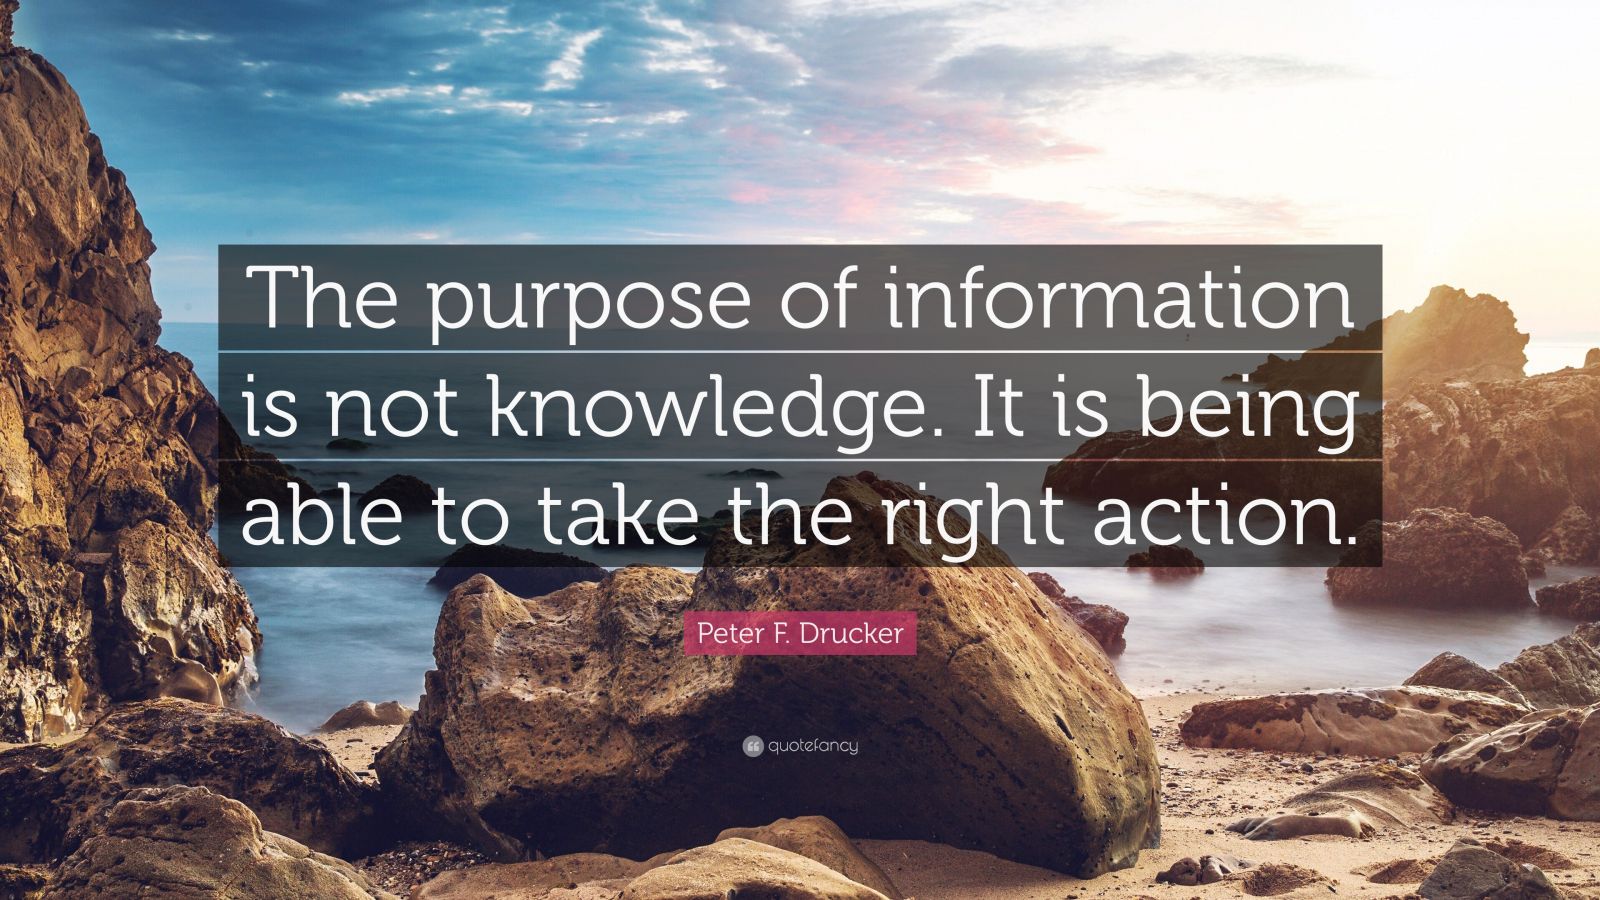 Peter F. Drucker Quote: “The purpose of information is not knowledge